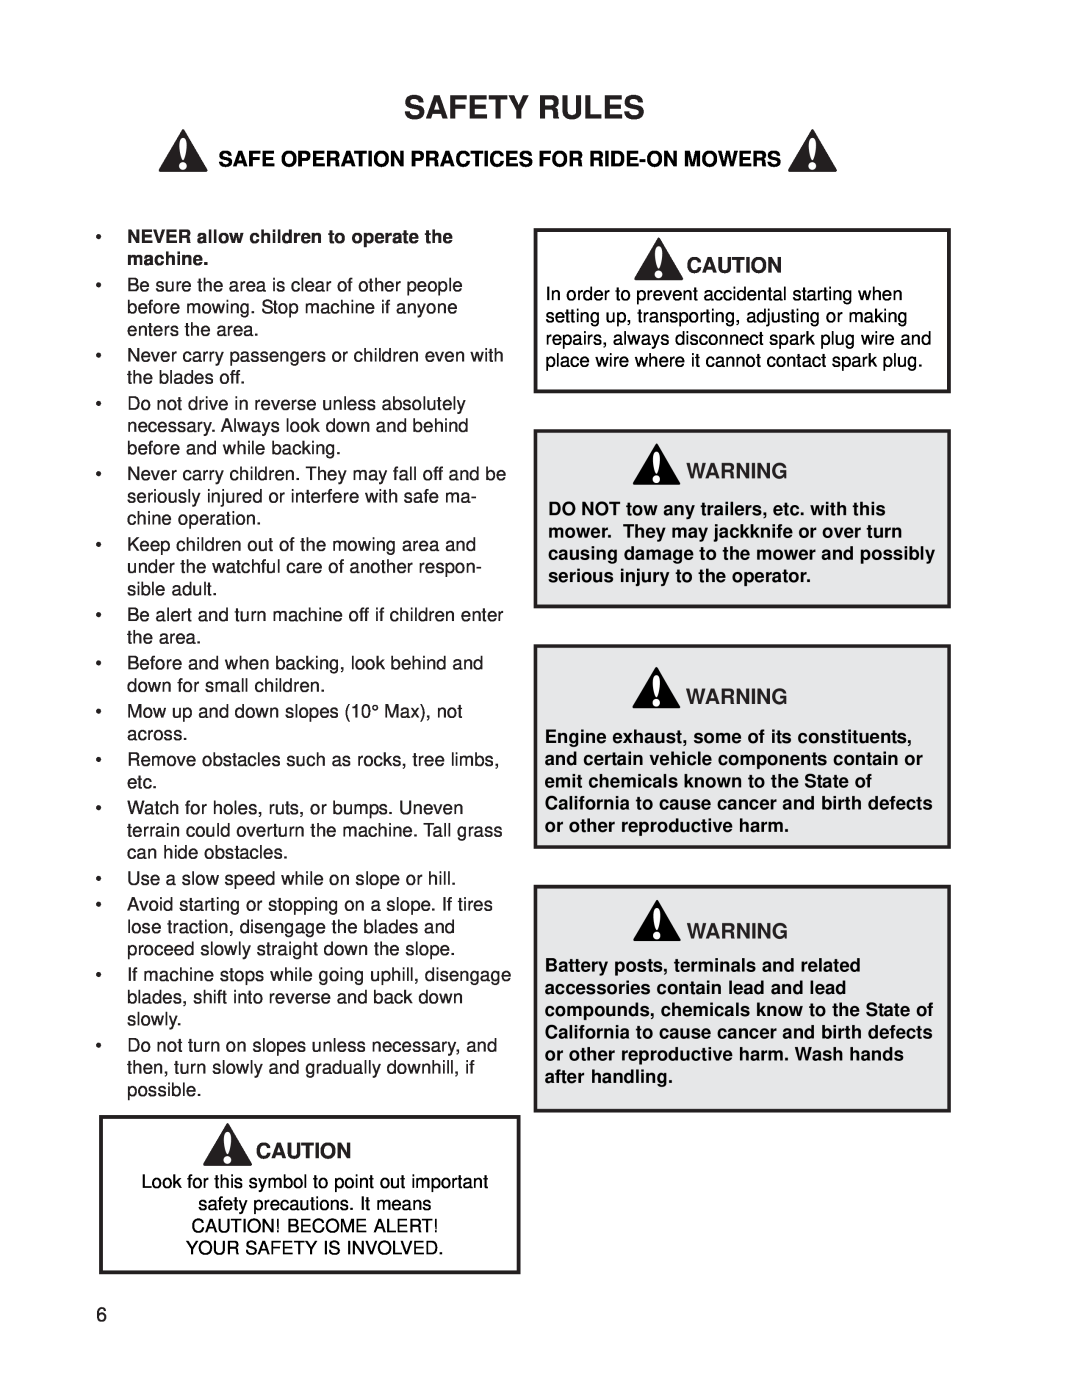 Dixon 539 131354 Safety Rules, Safe Operation Practices For Ride-On Mowers, NEVER allow children to operate the machine 